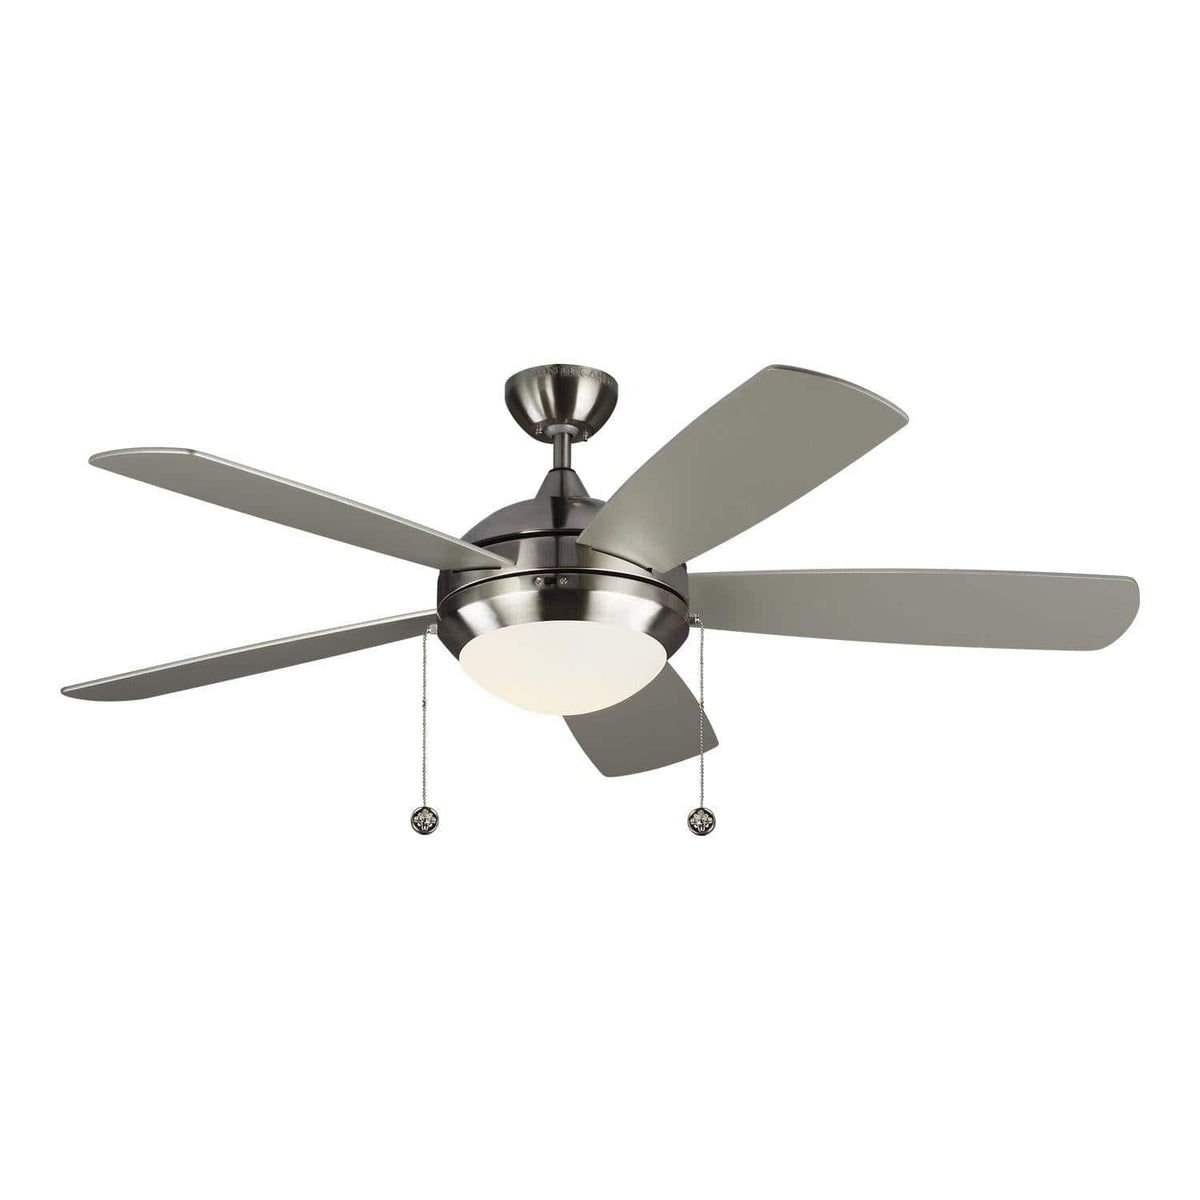 Visual Comfort Fan Collection - Discus Classic 52" Ceiling Fan - 5DIC52BSD-V1 | Montreal Lighting & Hardware